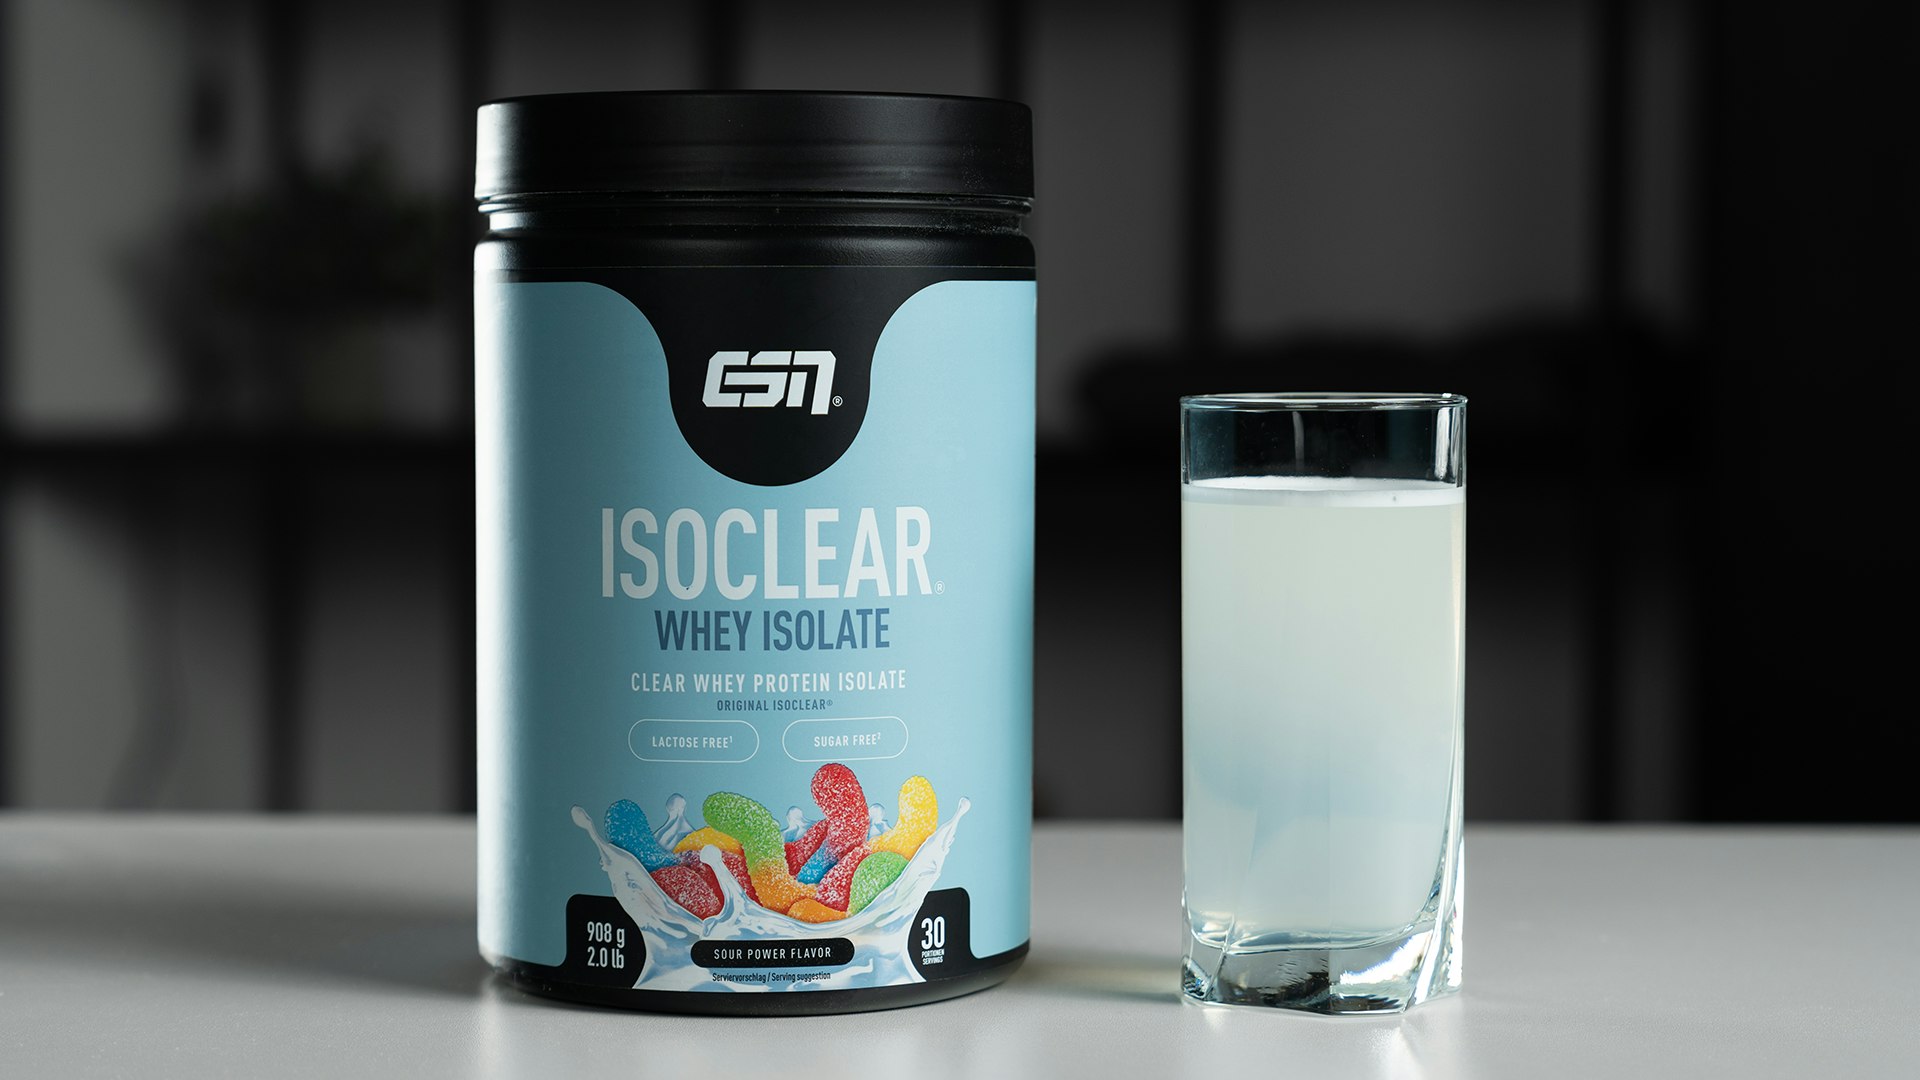 ESN ISOCLEAR "Sour Power"